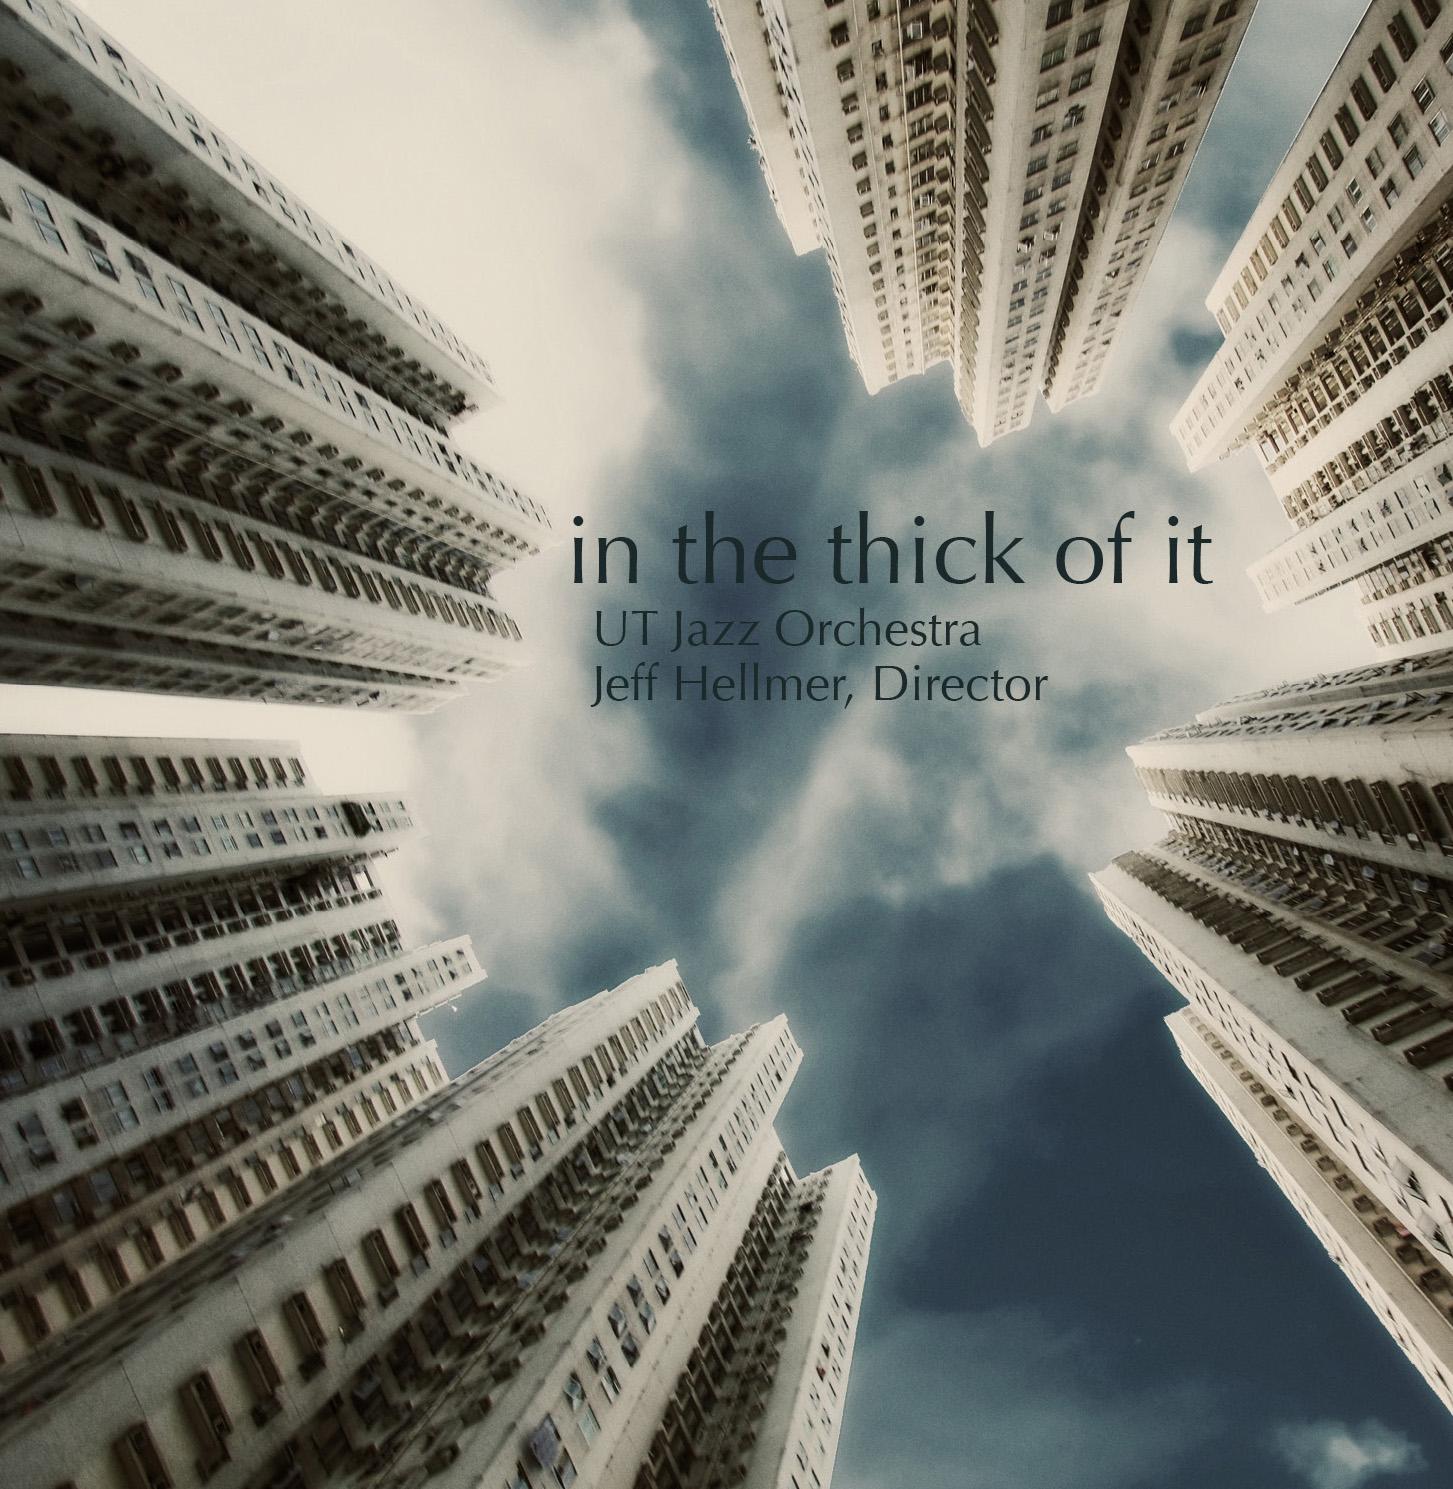 Recording Cover of "In the Thick of It"; High-rise buildings tower over the viewer on all sides with cloudy blue skies beyond.